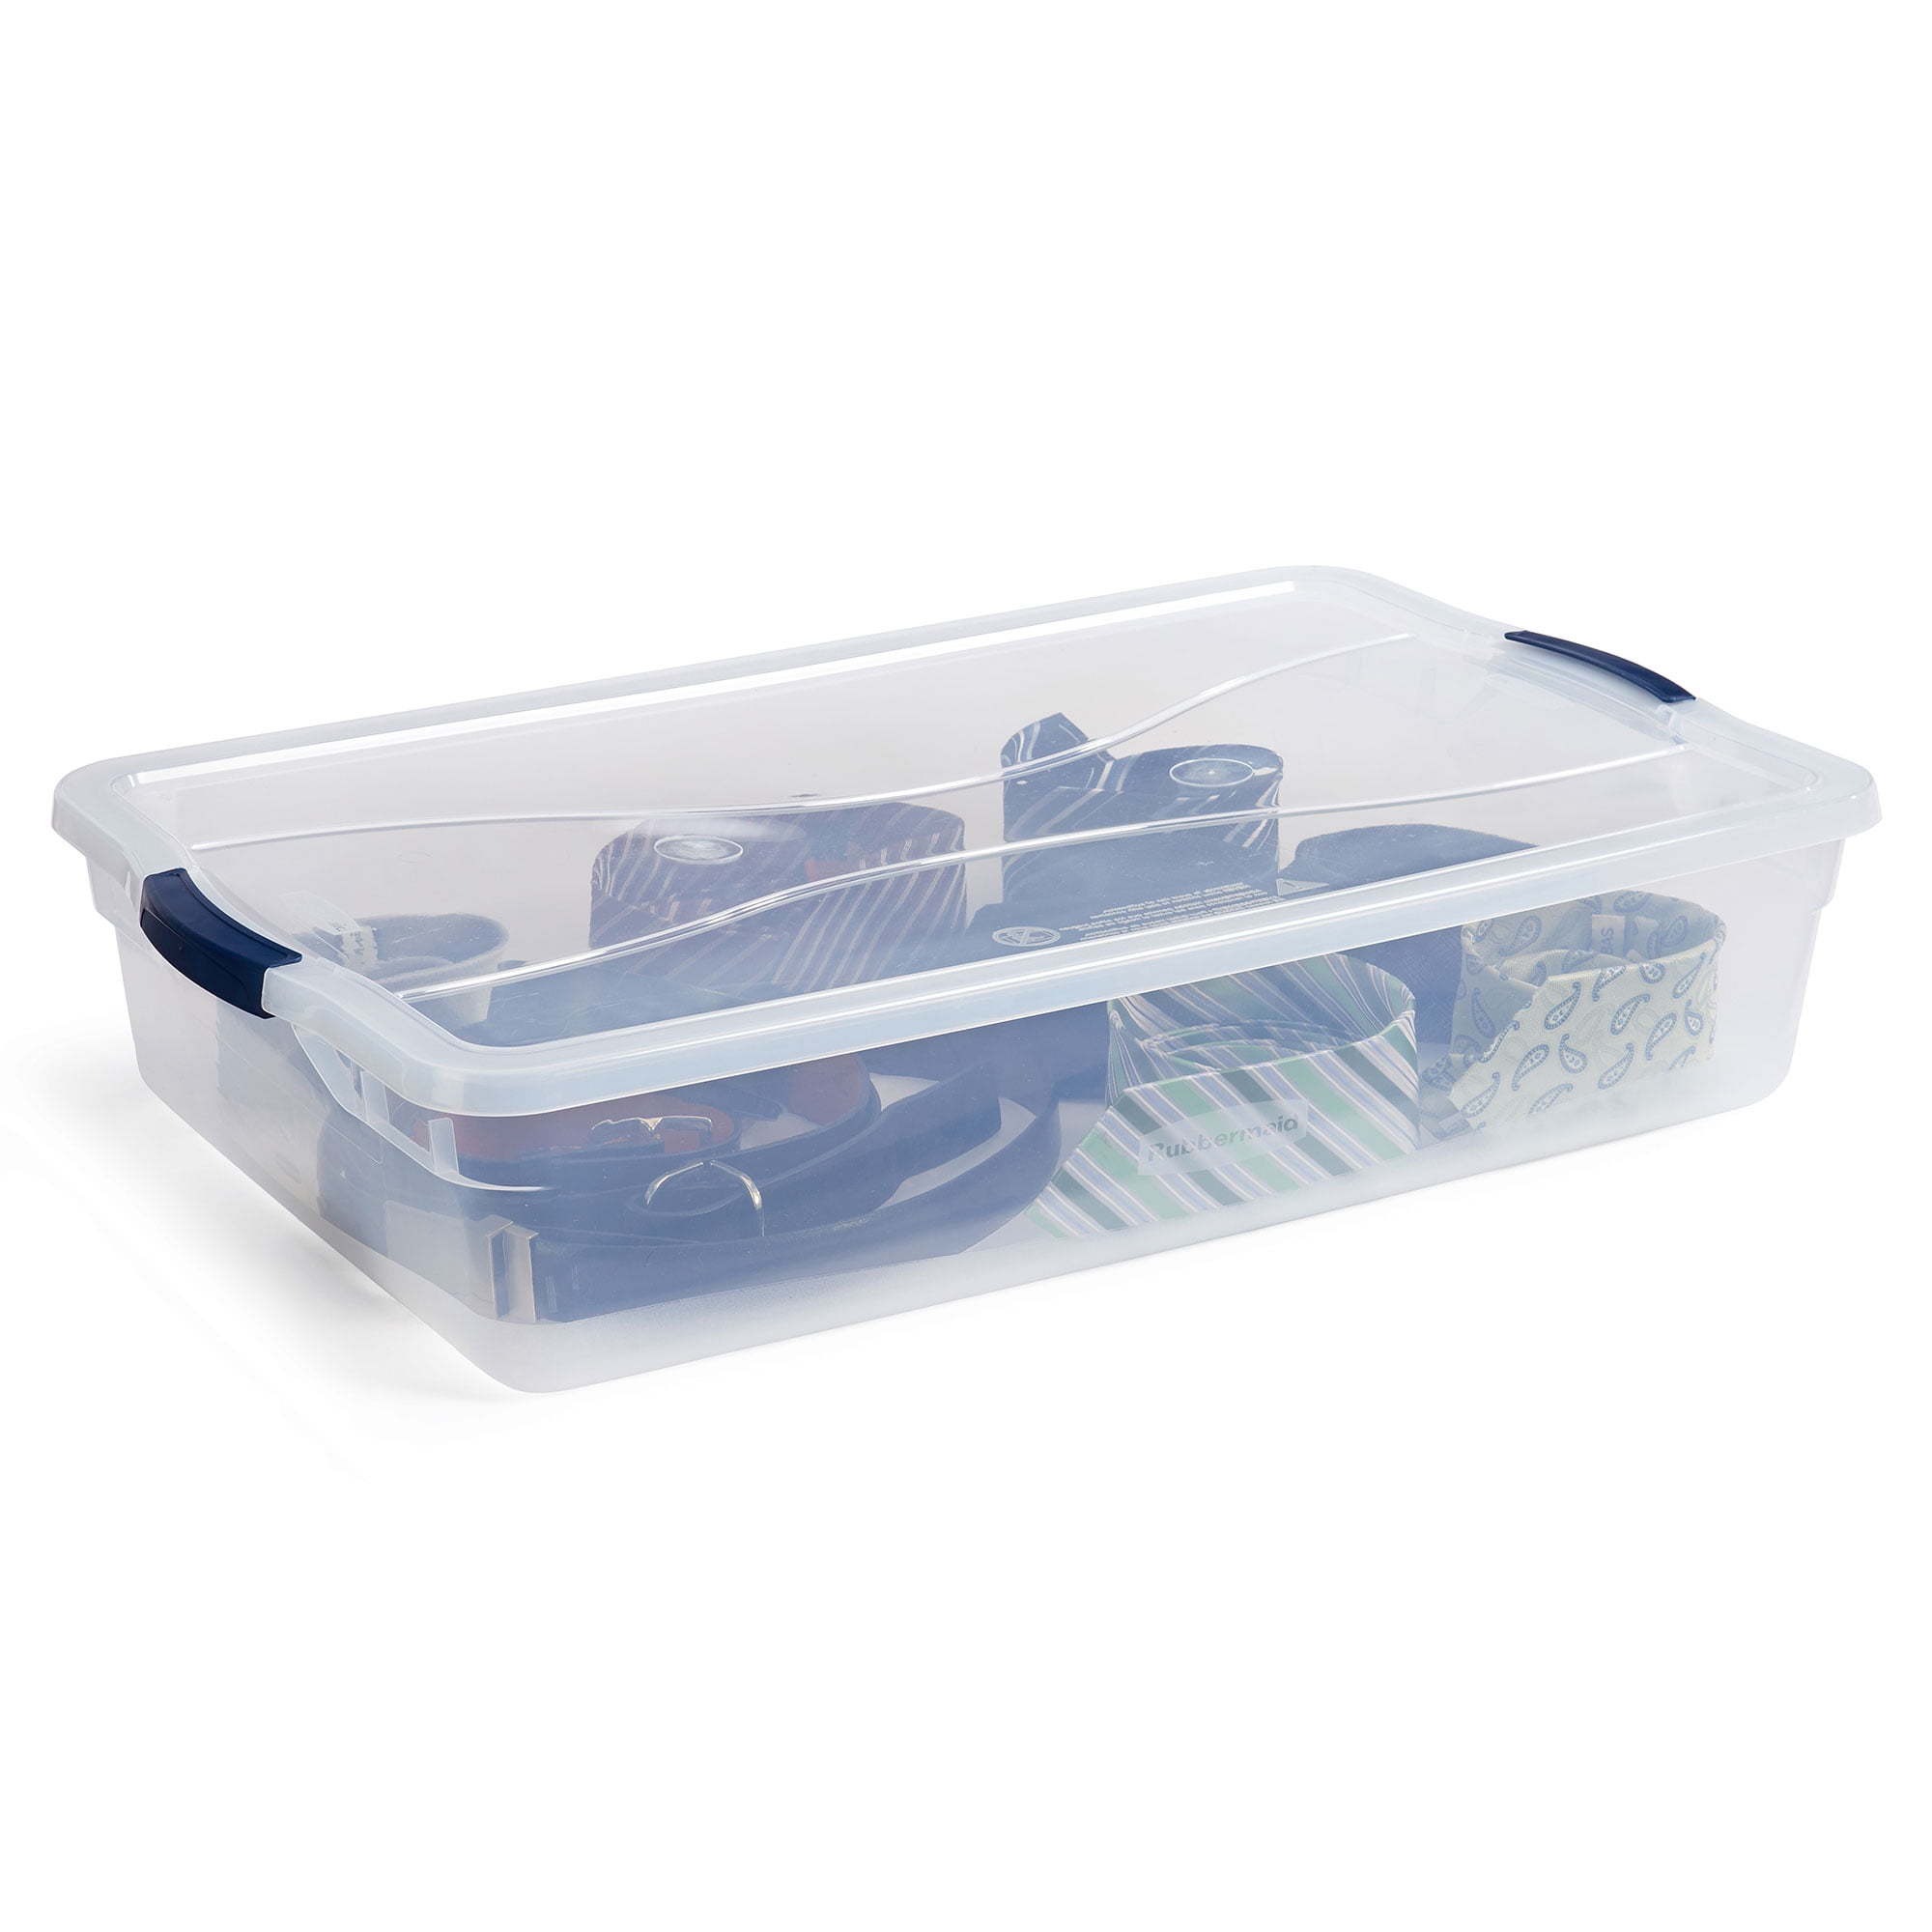 Rubbermaid Clever Store RMCC300014 Storage Container, Plastic, Clear Blue,  16.7 in L, 13.3 in W, 11.3 in H #VORG2018117, RMCC300014